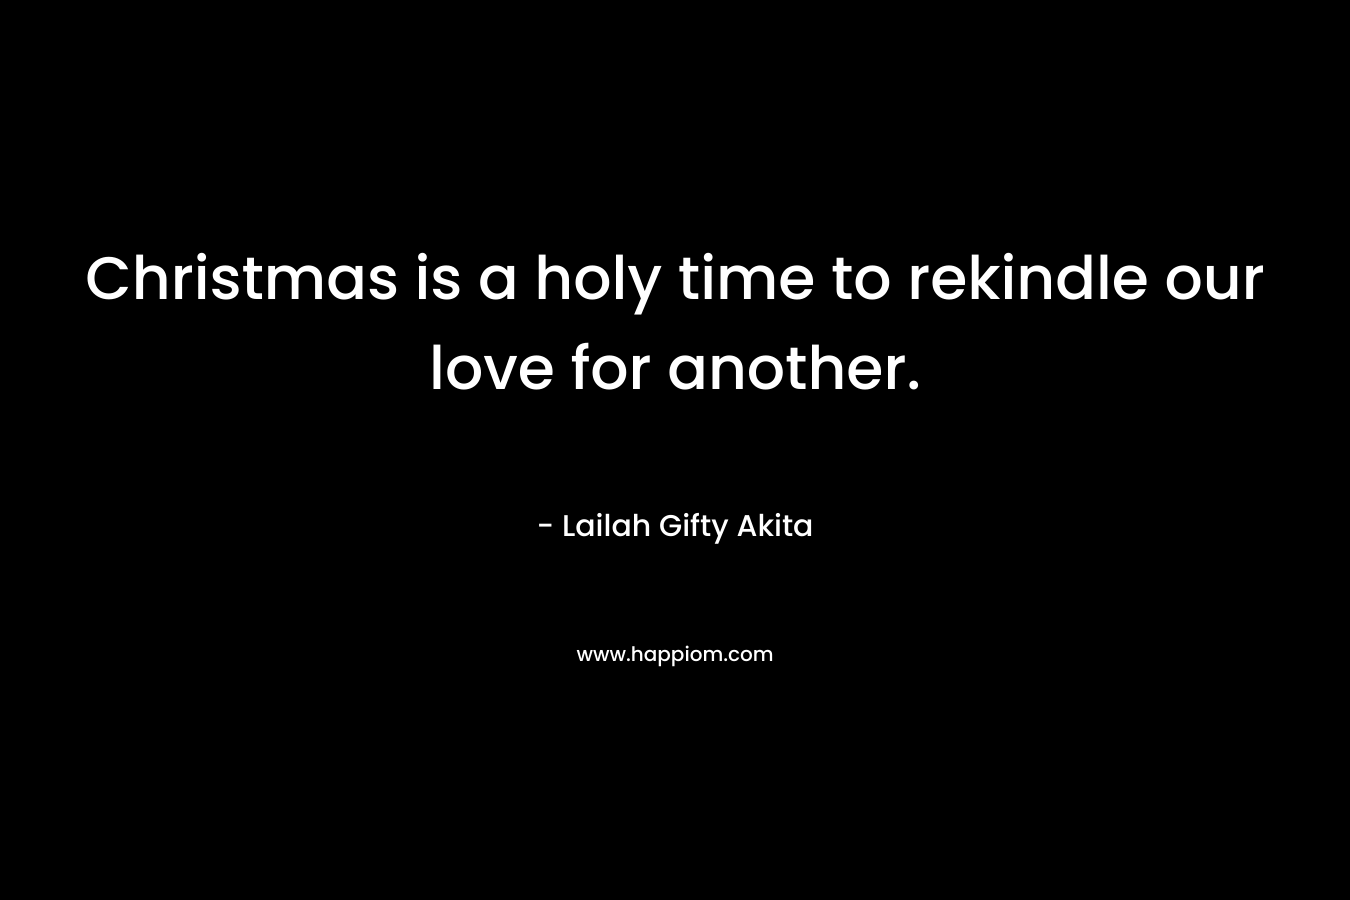 Christmas is a holy time to rekindle our love for another. – Lailah Gifty Akita